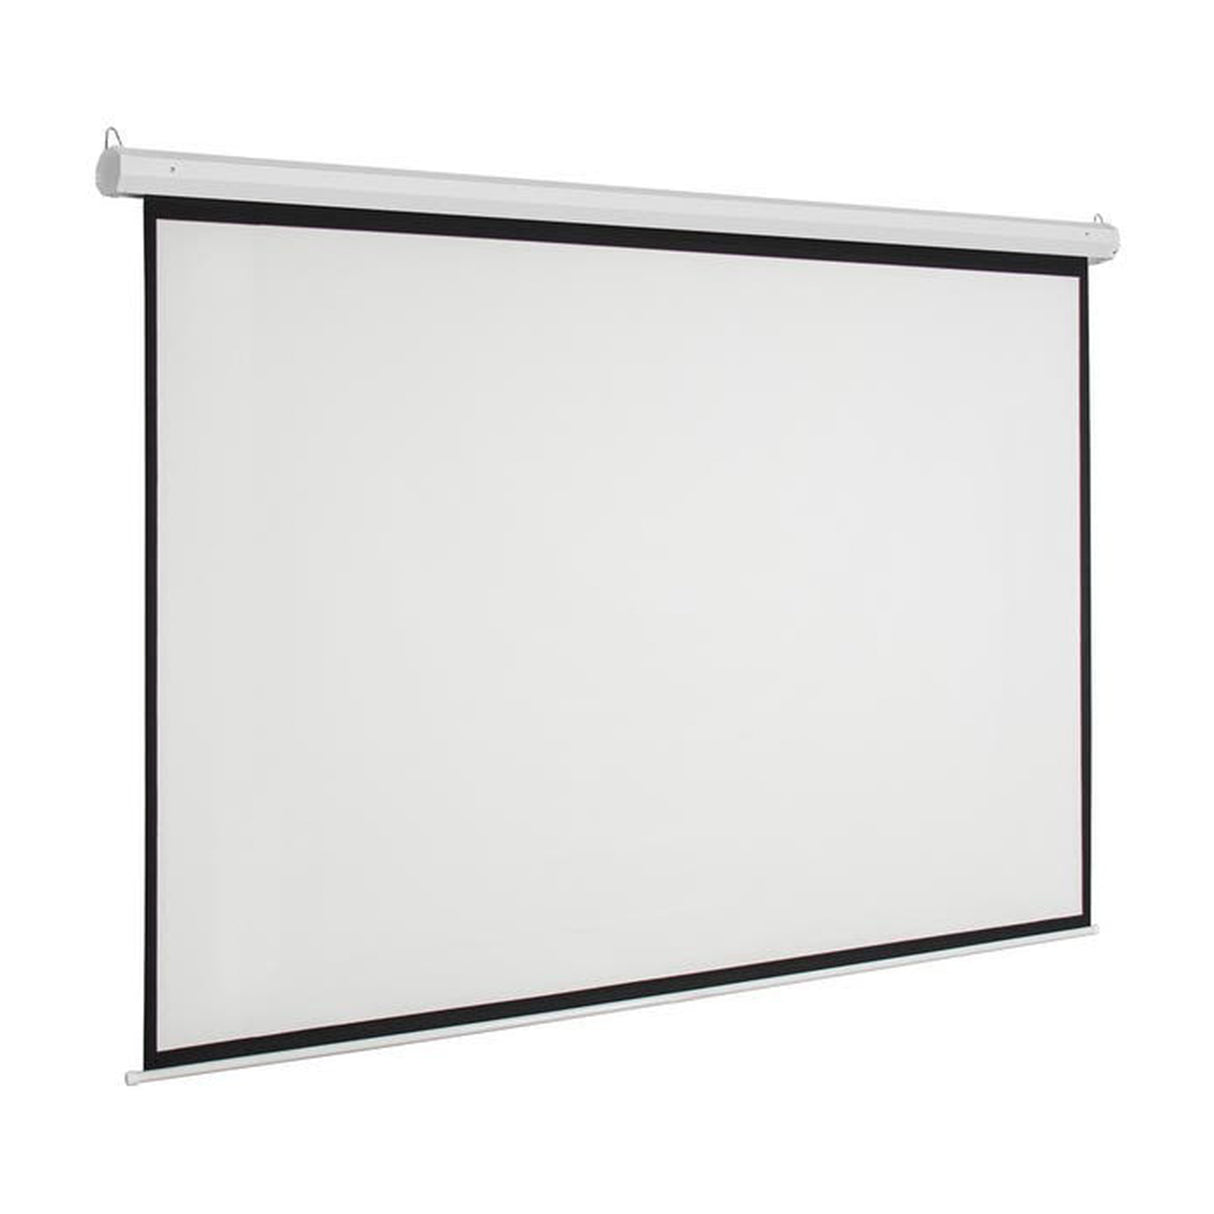 RNT Projection Screen Motorised 180 Inches - 16:9 Ratio